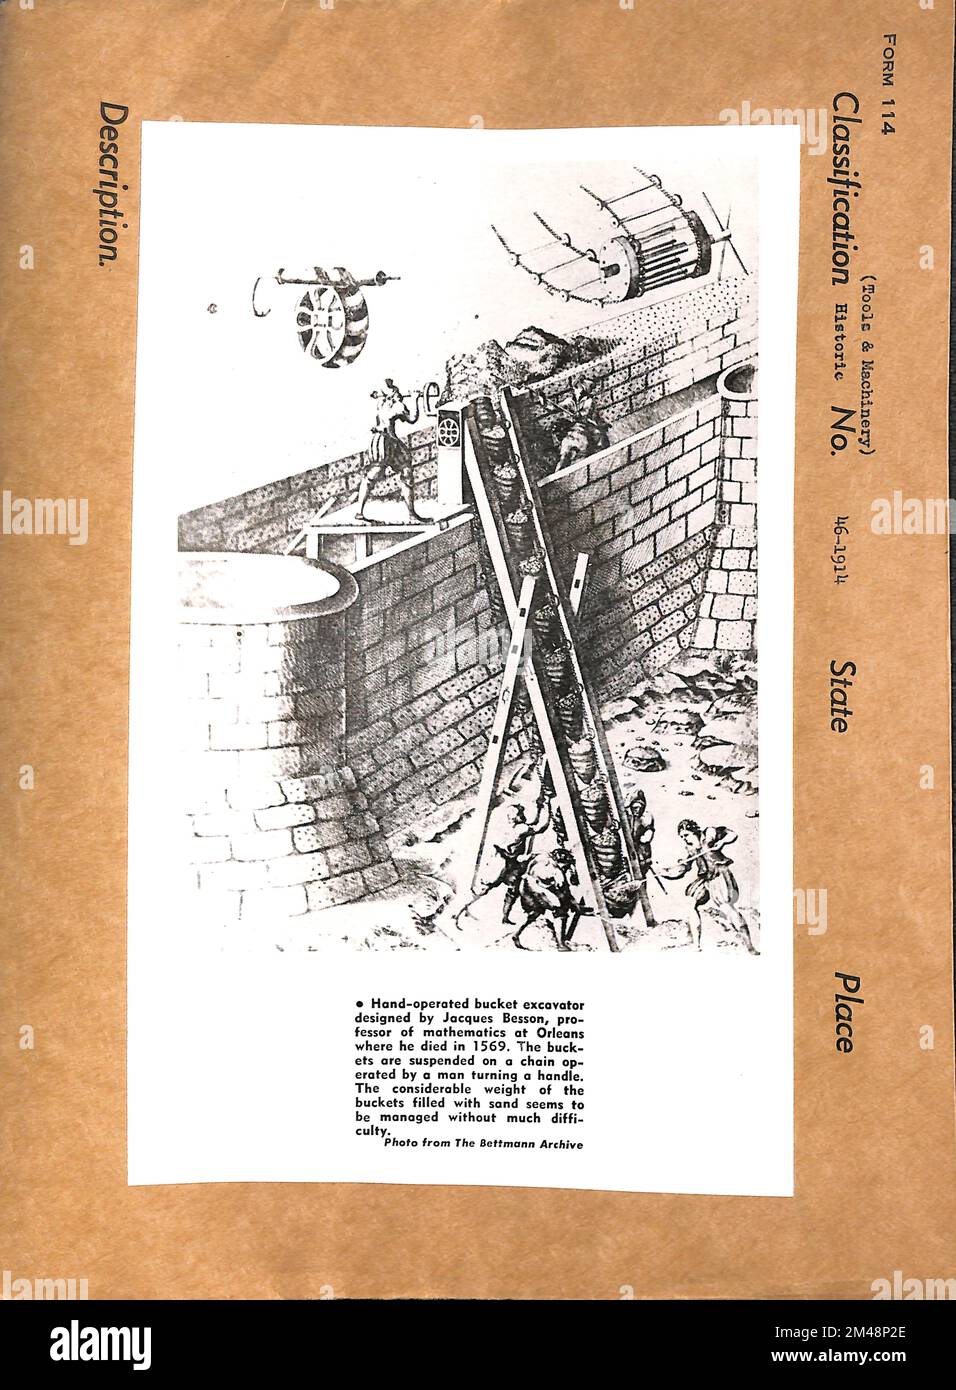 Hand-operated Bucket Excavator. Original caption: 'Hand-operated bucket excavator designed by Jacques Besson, professor of mathematics at Orleans where he died in 1569. The buckets are suspended on a chain operated by a man turning a handle. The considerable weight of the buckets filled with sand seems to be managed without much difficulty'. Stock Photo